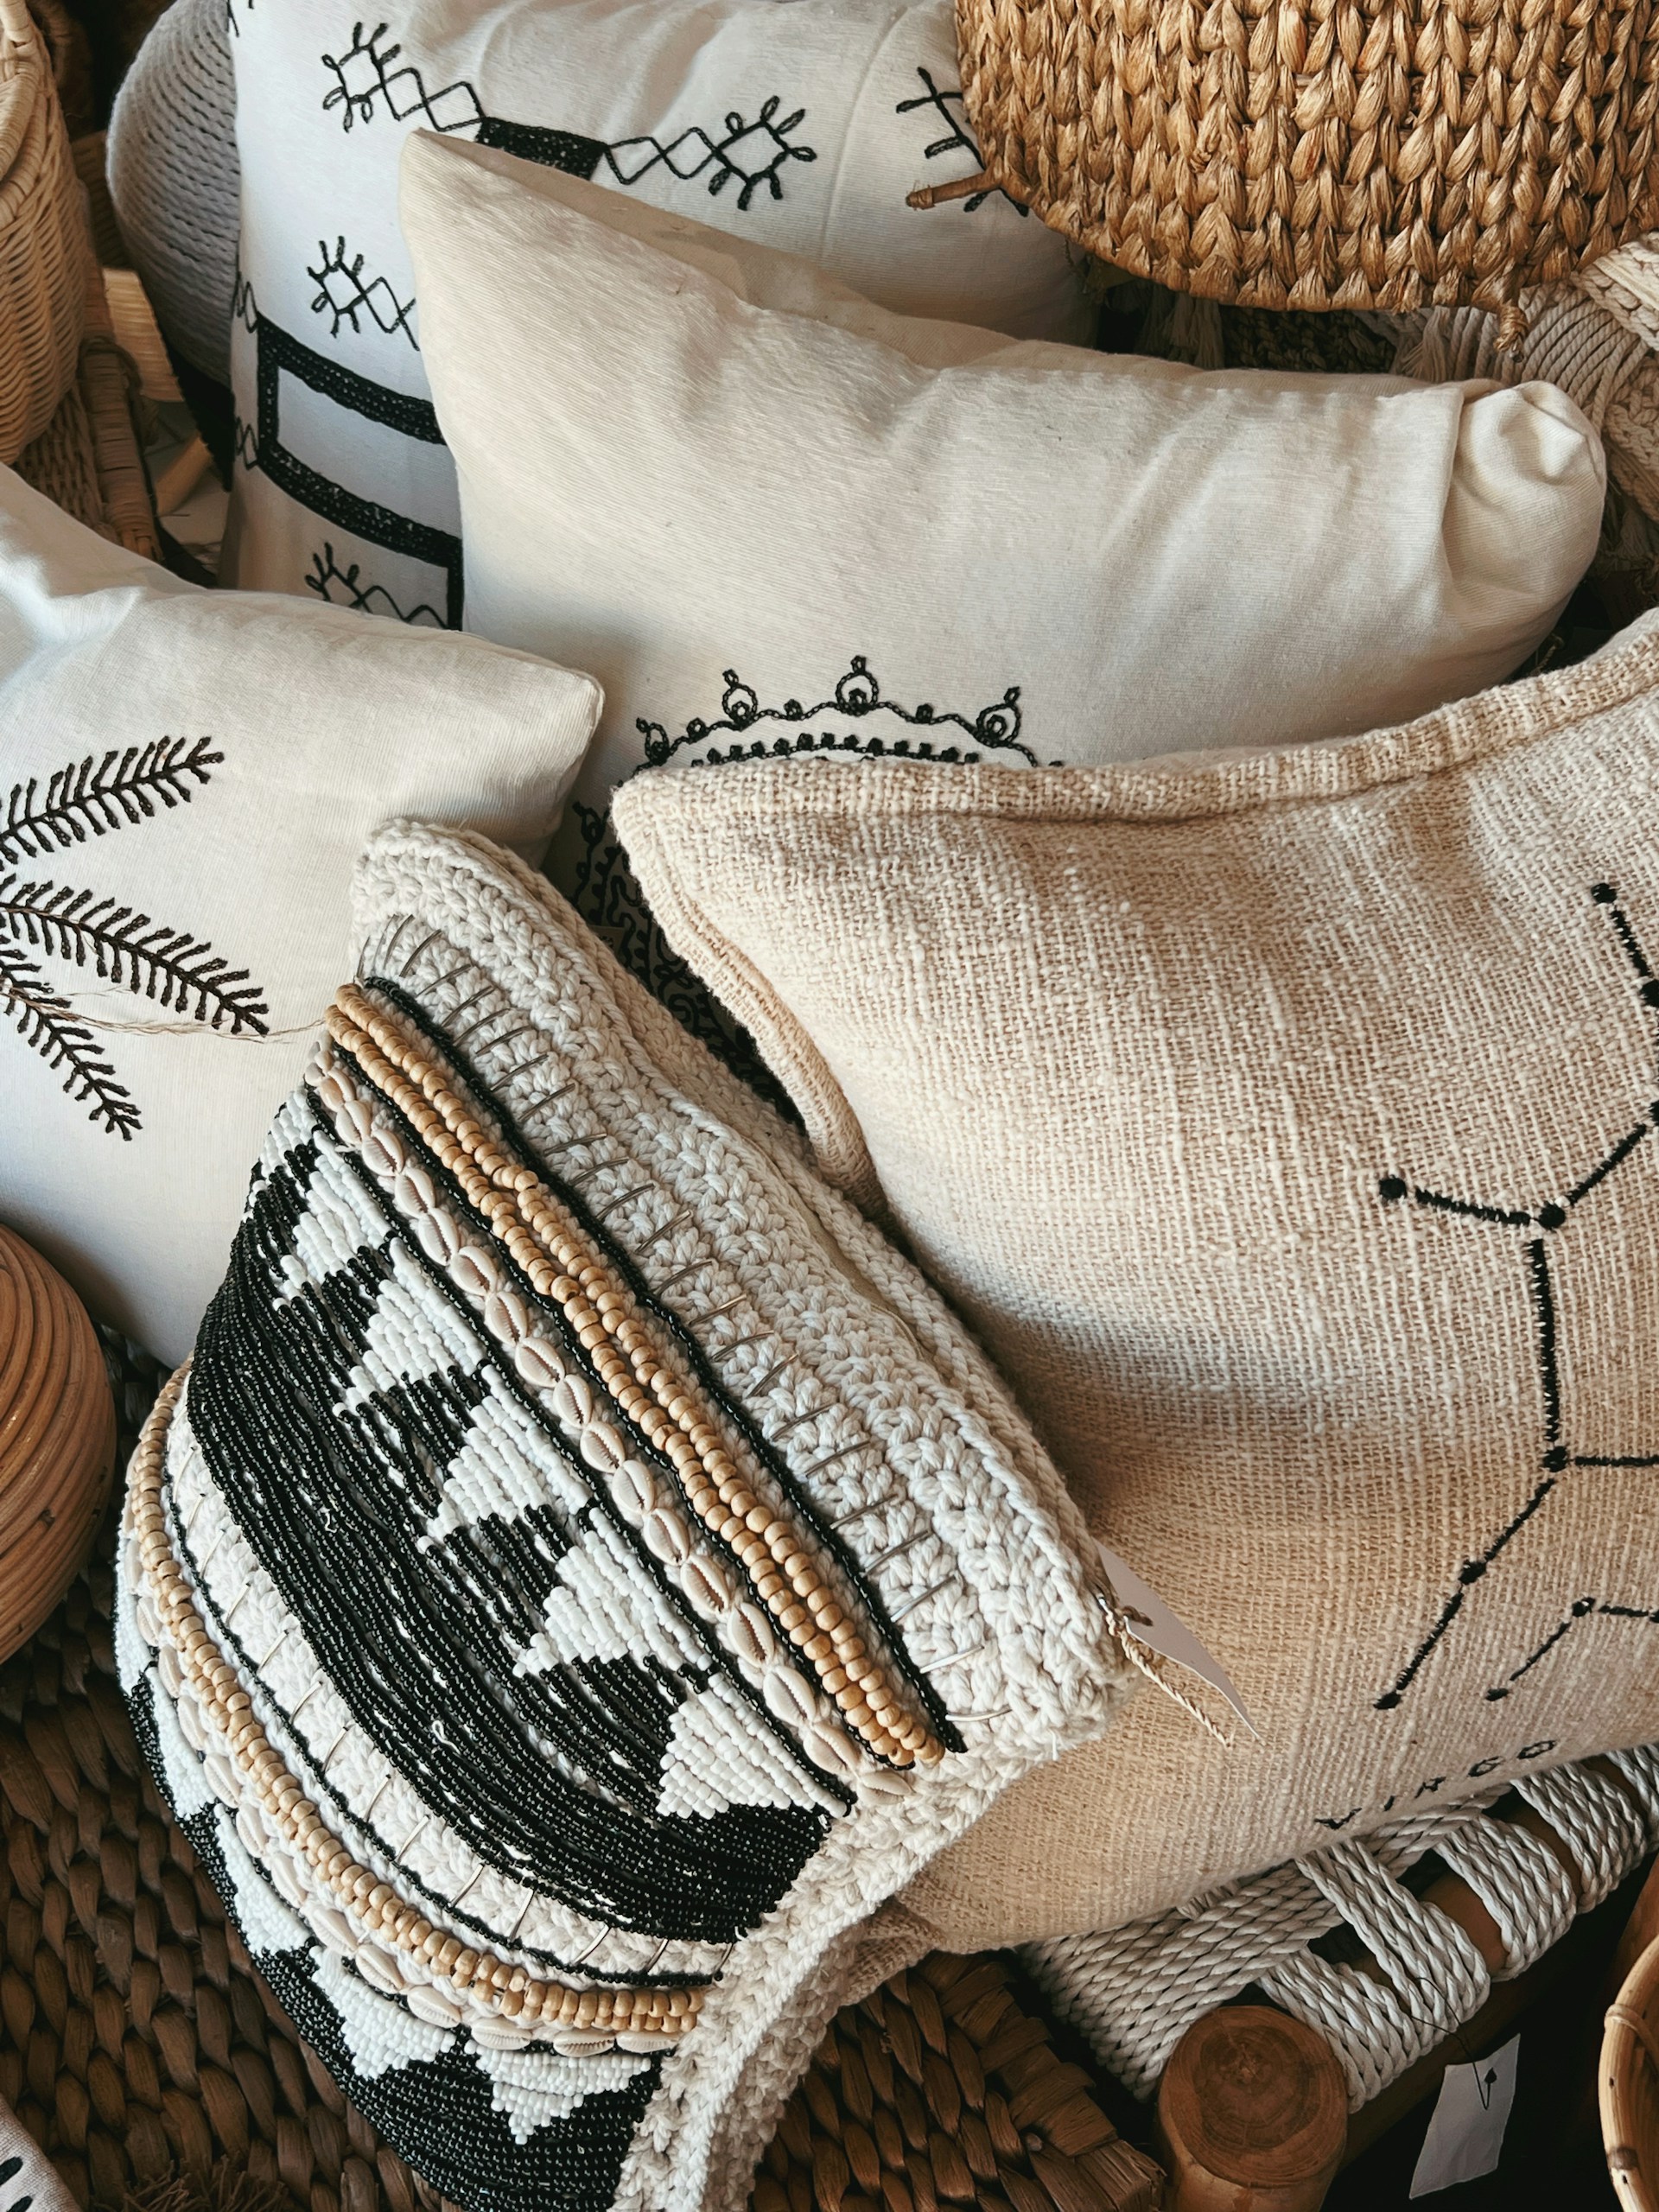 Sail Away in Style: Discover the LVacation Beach Pillow Series